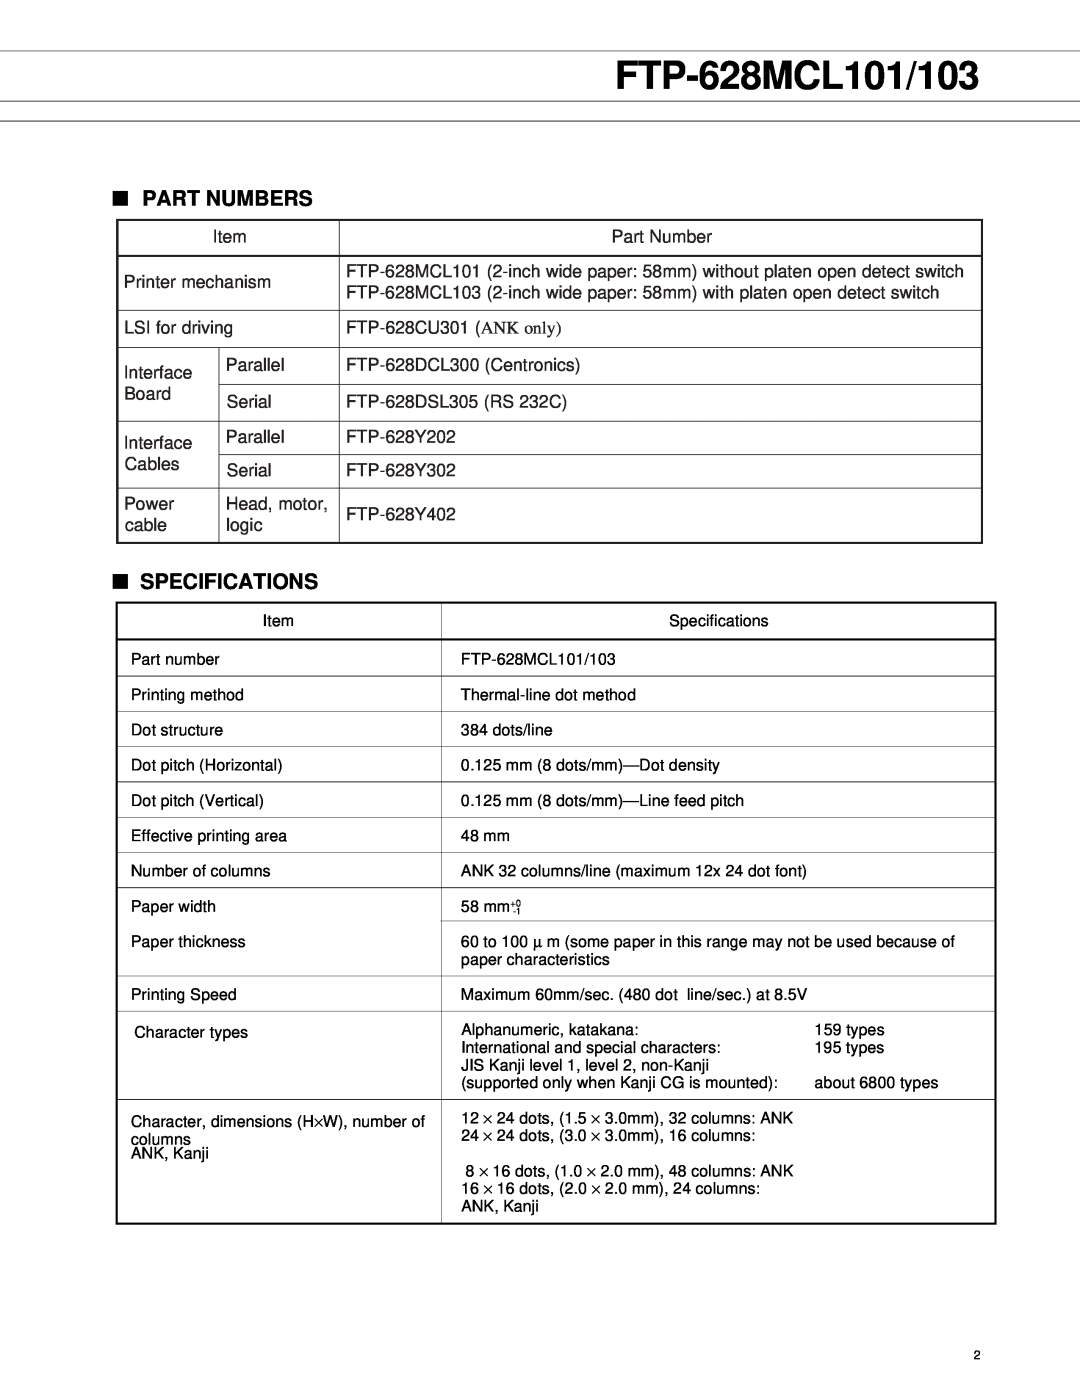 Fujitsu FTP-628MCL103 manual FTP-628MCL101/103, Part Numbers, Specifications 